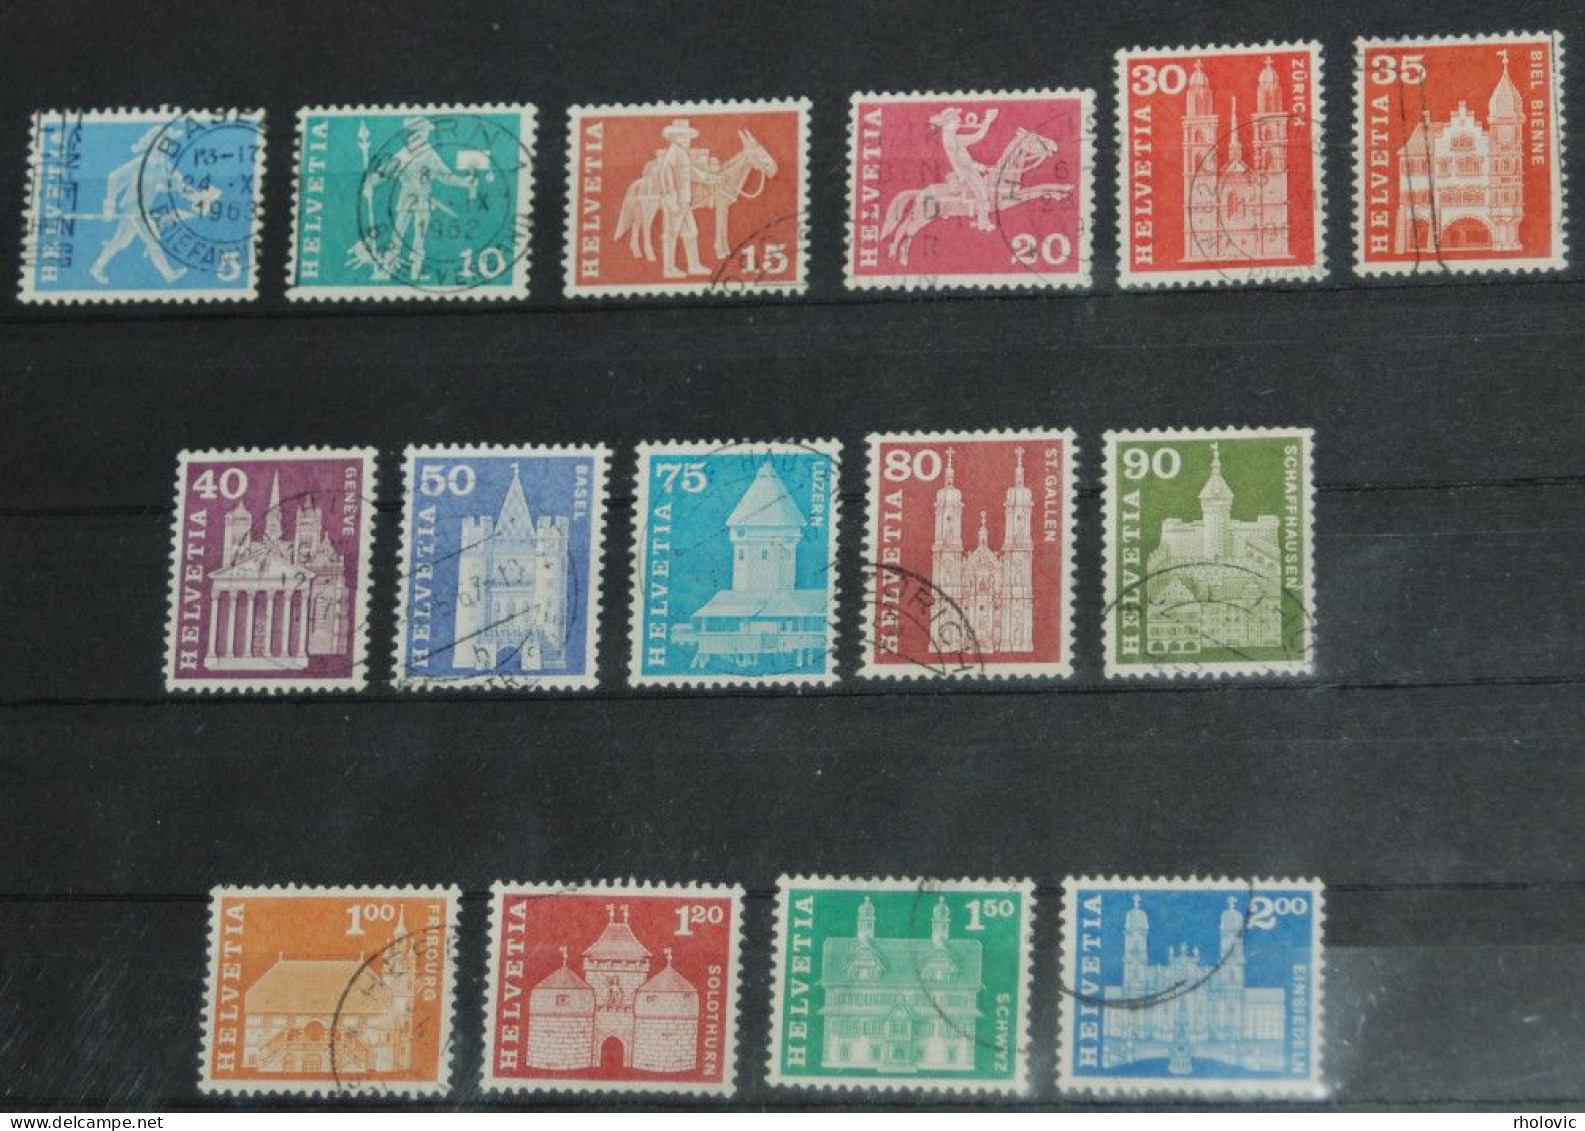 SWITZERLAND 1960, Postal History, Monuments, Buildings, Architecture, Used - Monumenti